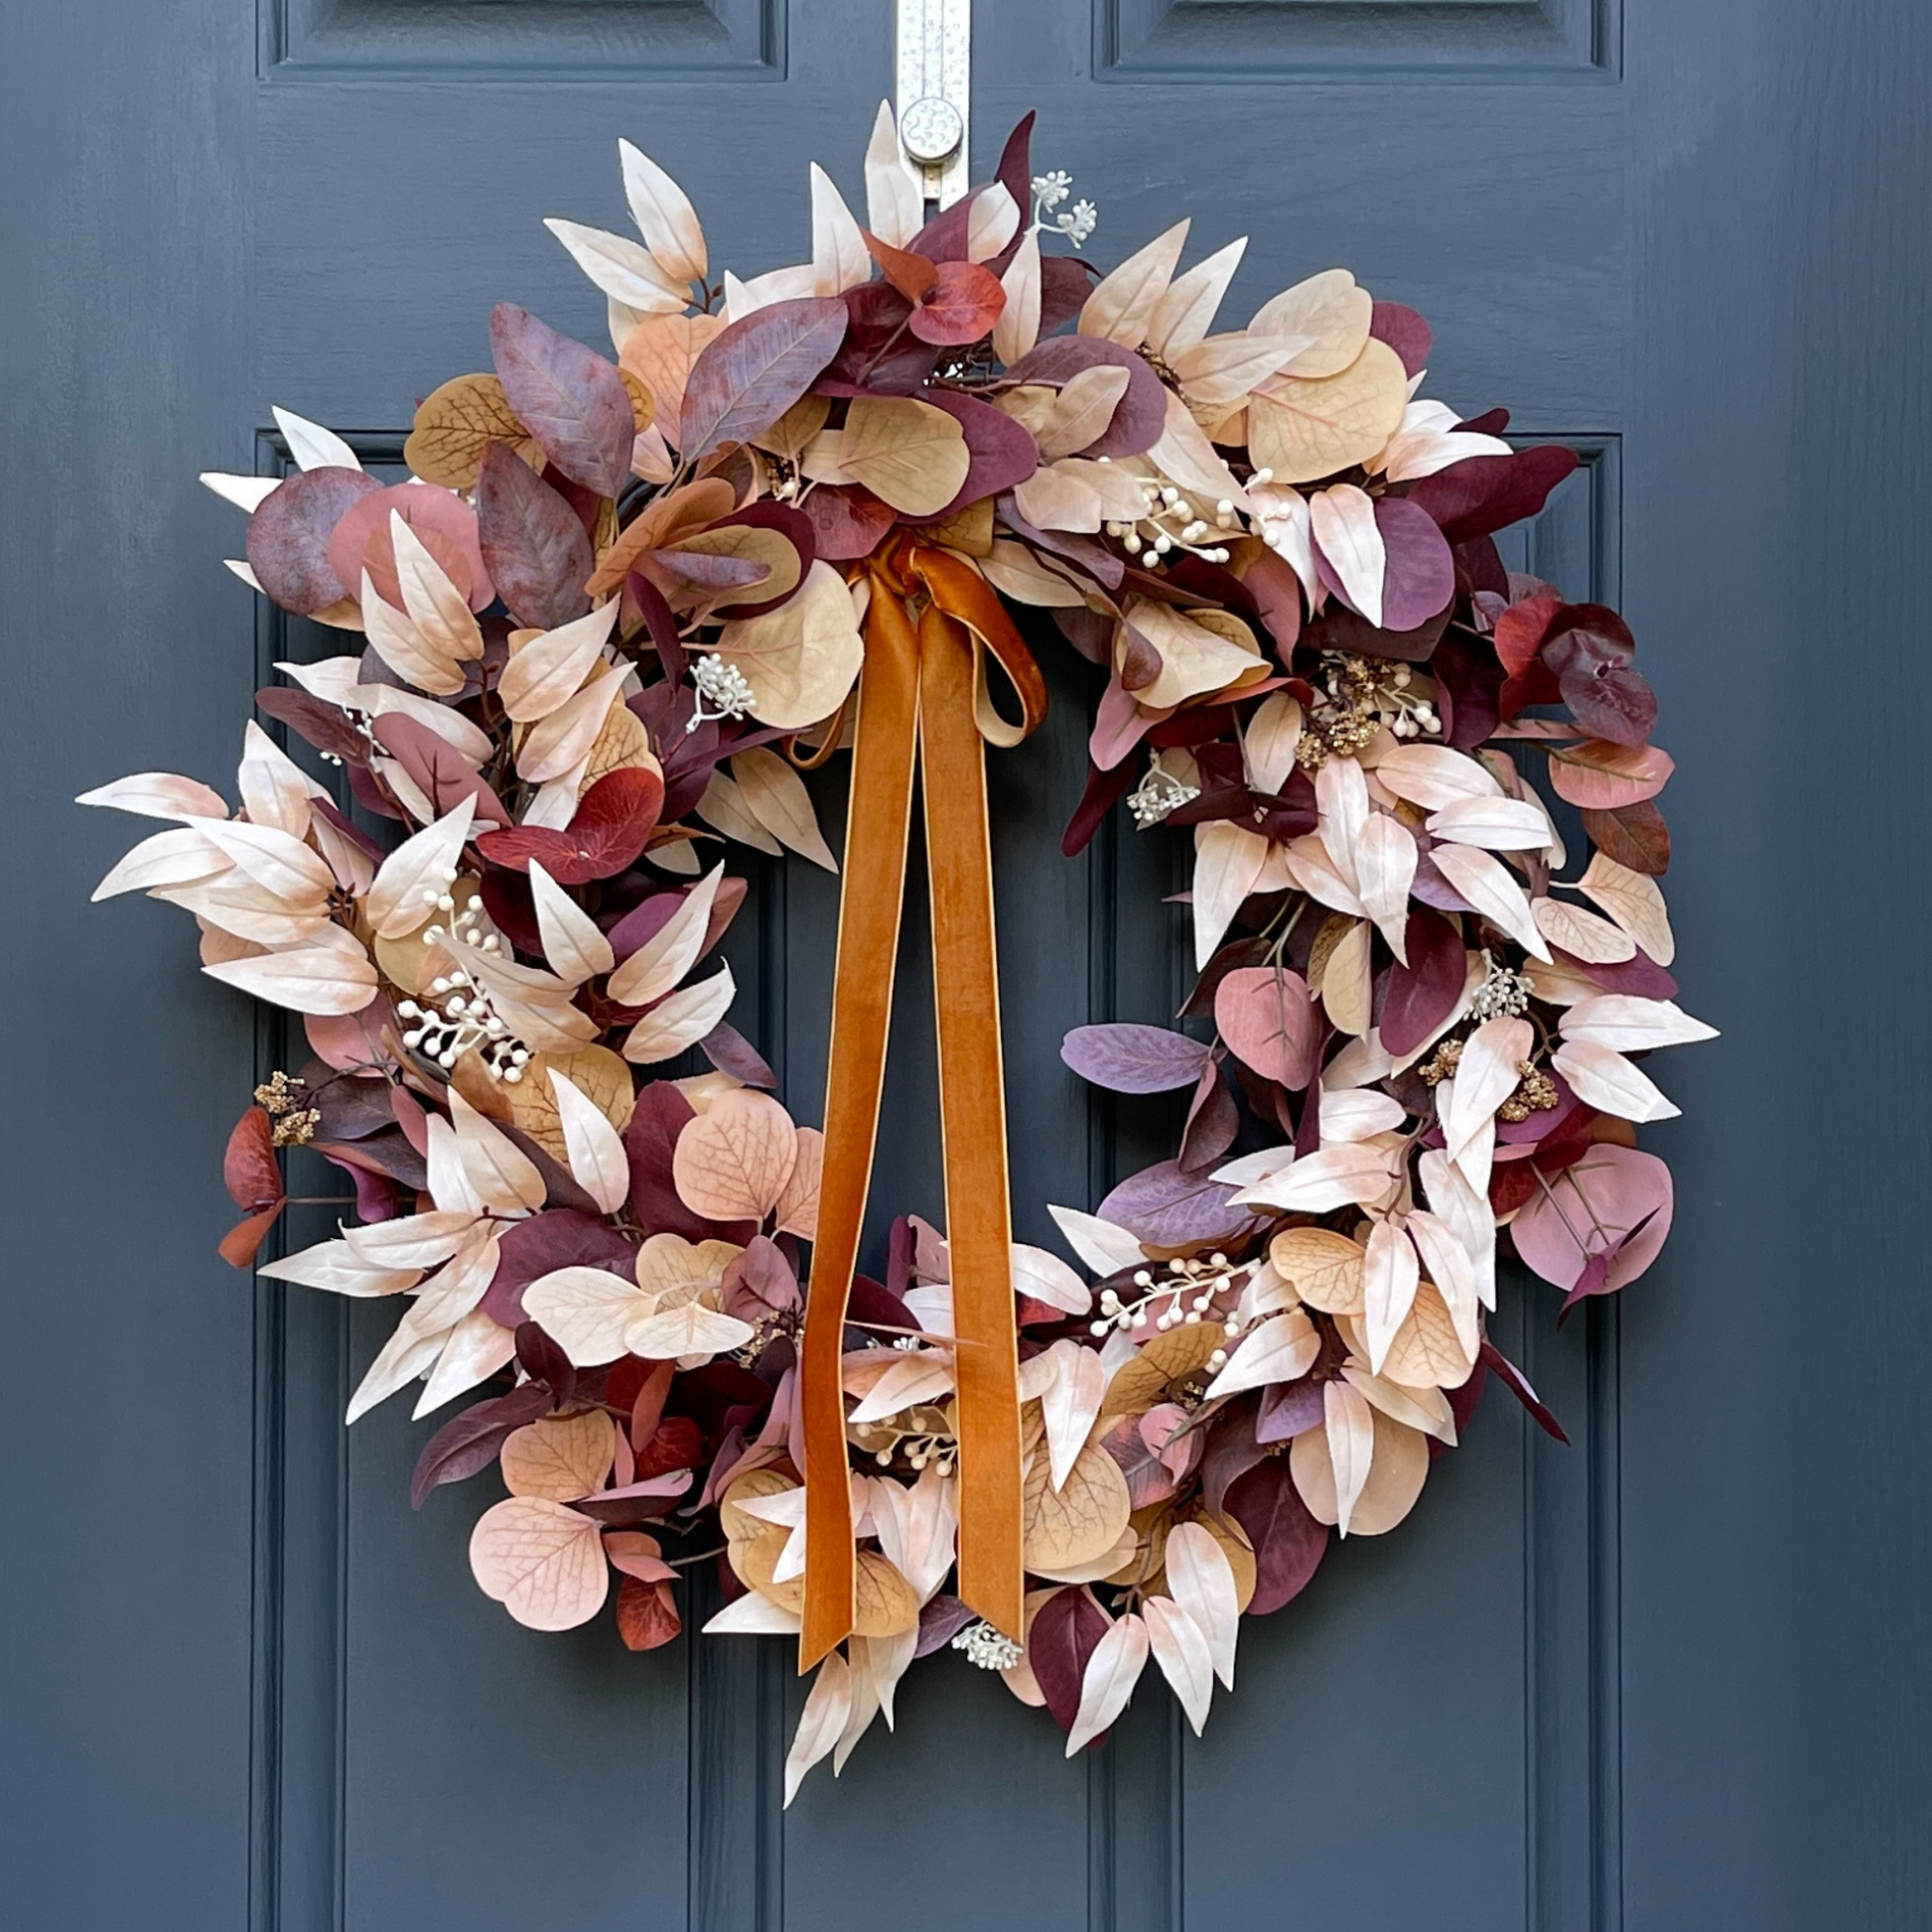 This neutral autumn wreath has been handcrafted on a grapevine base and is filled with various types of cream & rust eucalyptus and berries, and is finished with a velvet copper bow.  Wreath is hanging from a gold wreath hanger on a dark blue door.